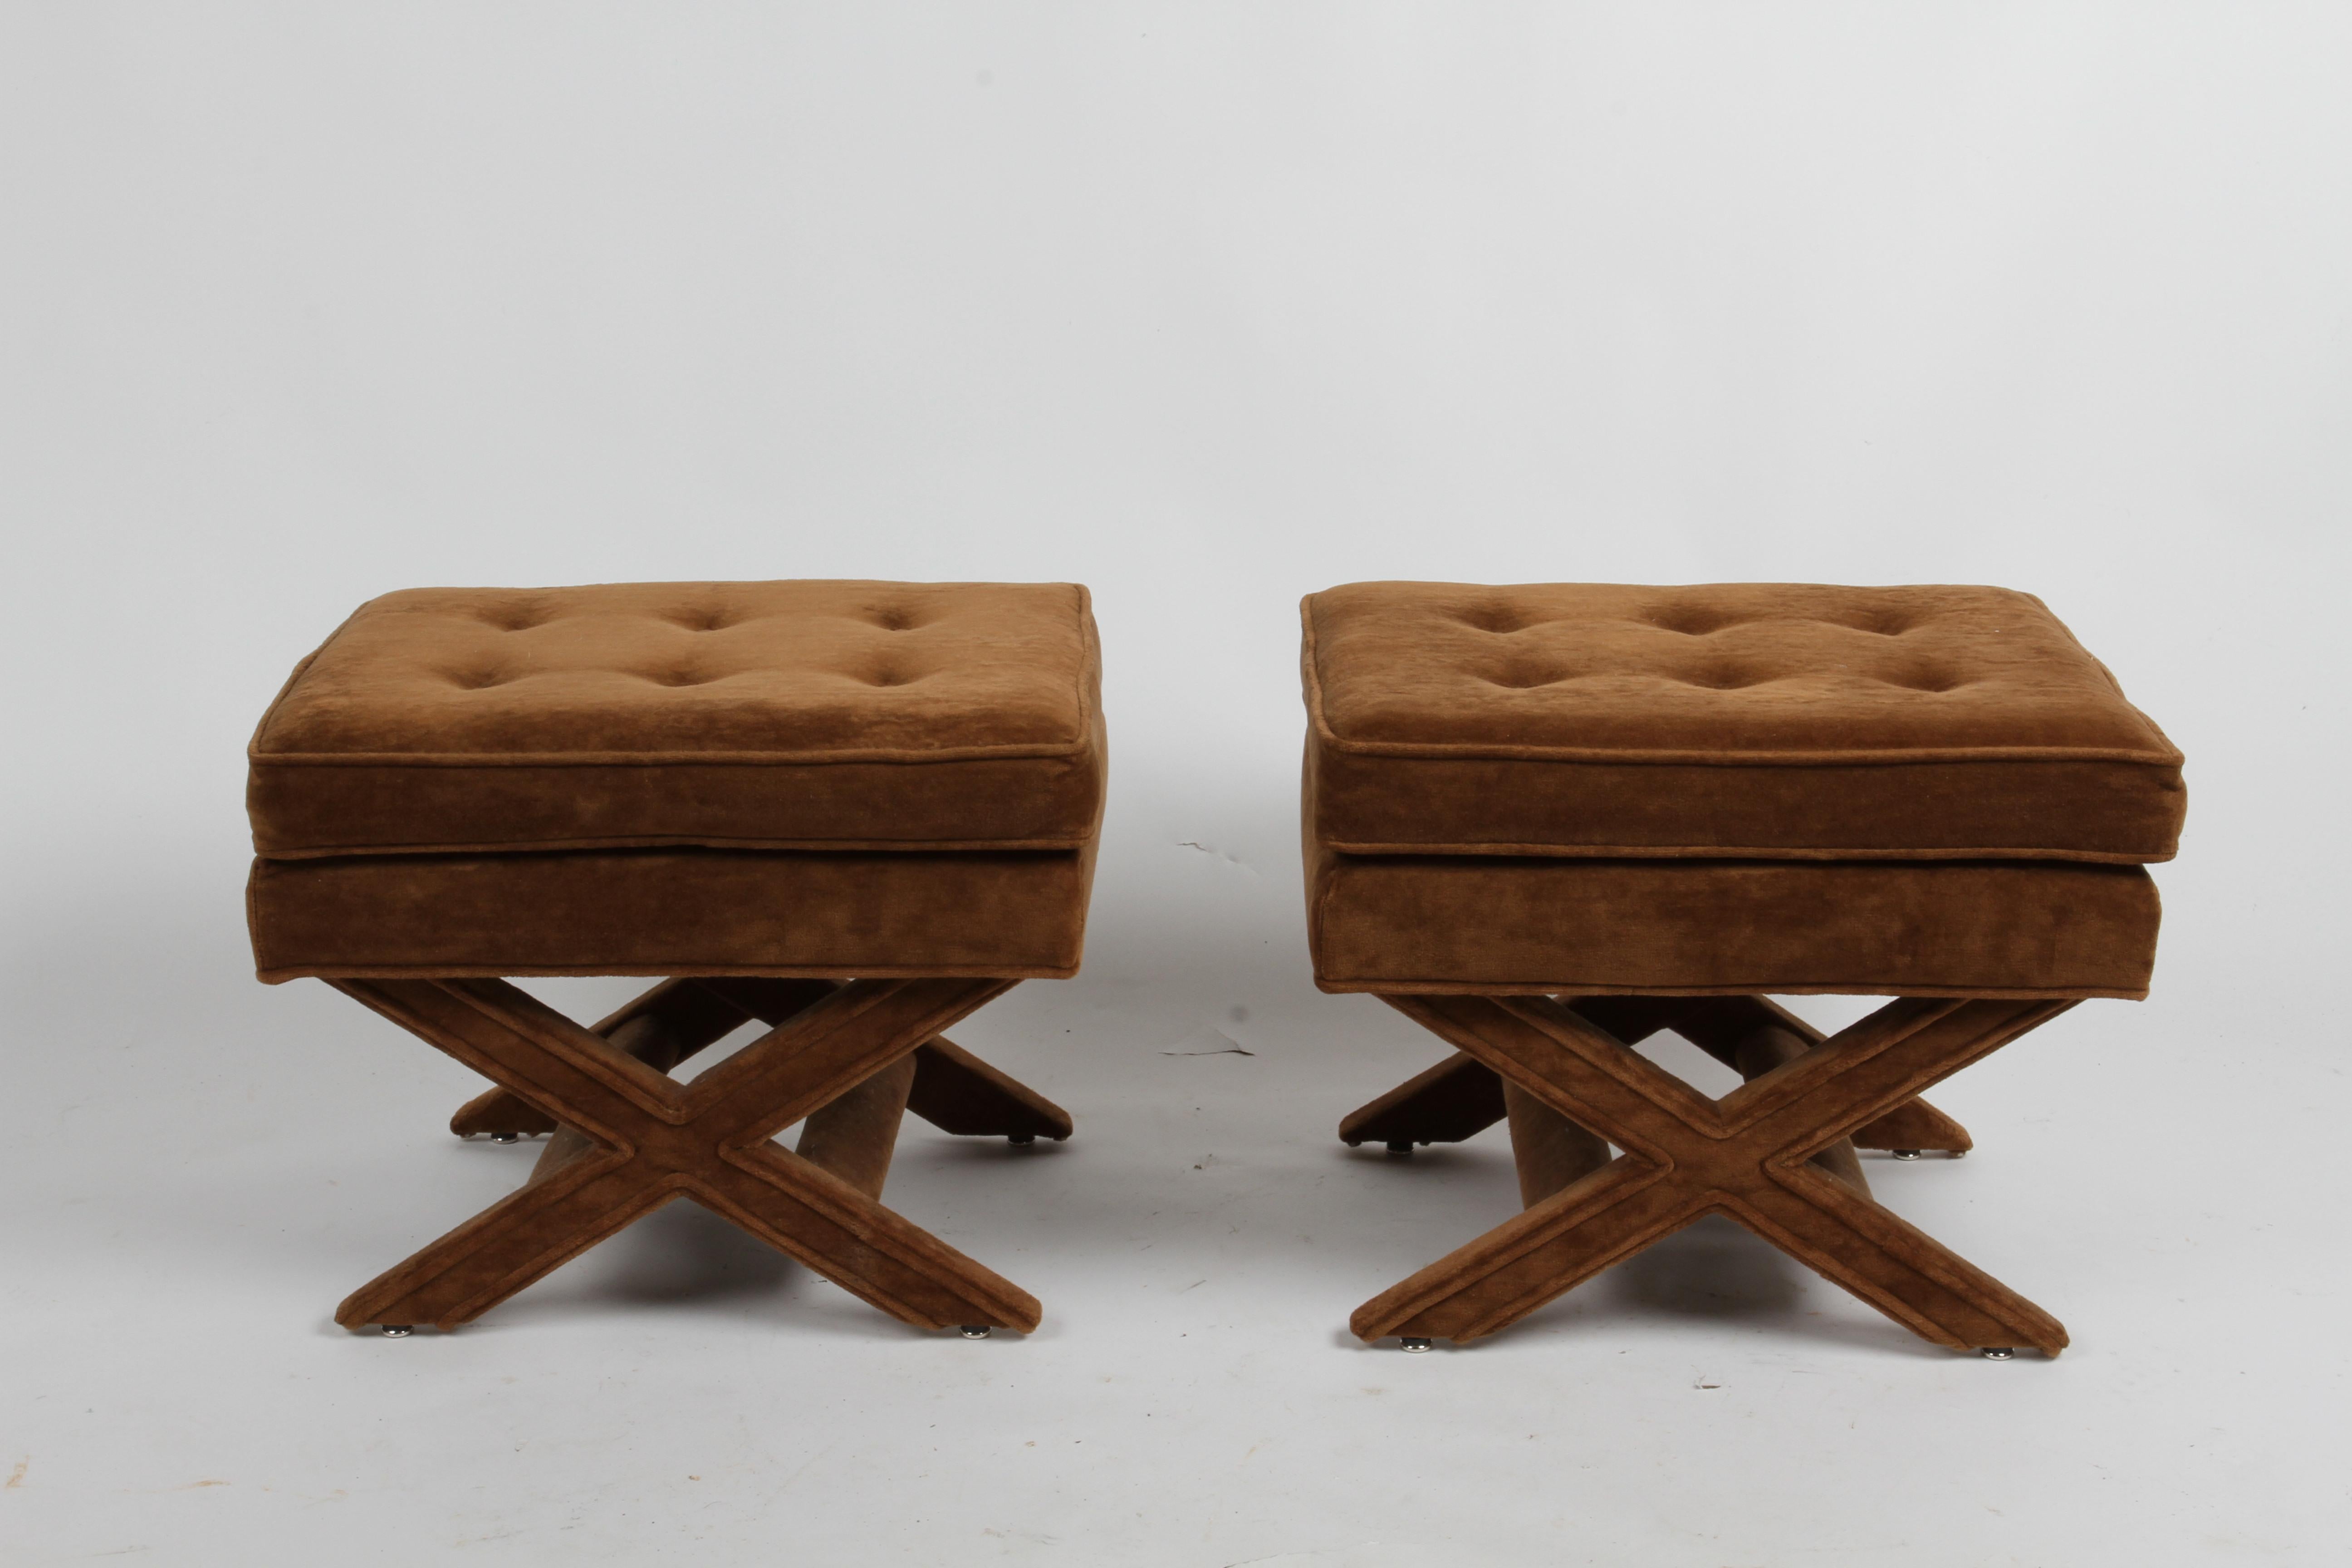 Pair of vintage Billy Baldwin Hollywood Regency style fully upholstered X stools, ottomans, benches or footrest in original brown velvet, circa 1970s. In fine usable condition, slight wear to the top, foam is good.